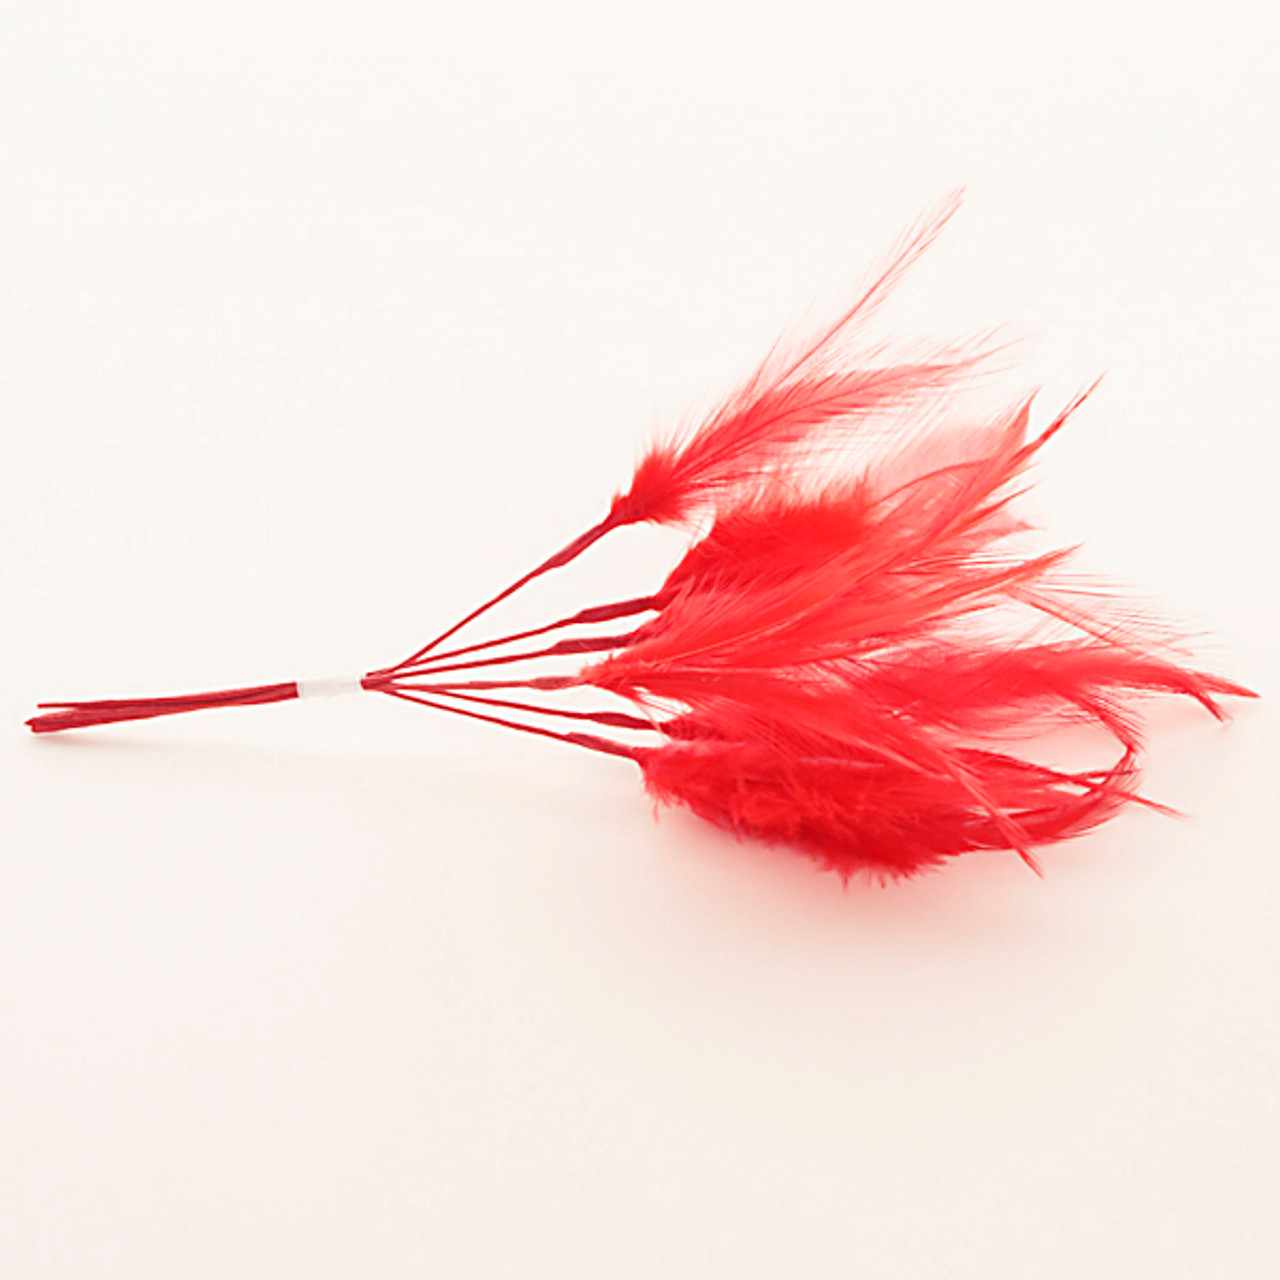 Wired Narrow Feather Craft Feathers x 6 Red 